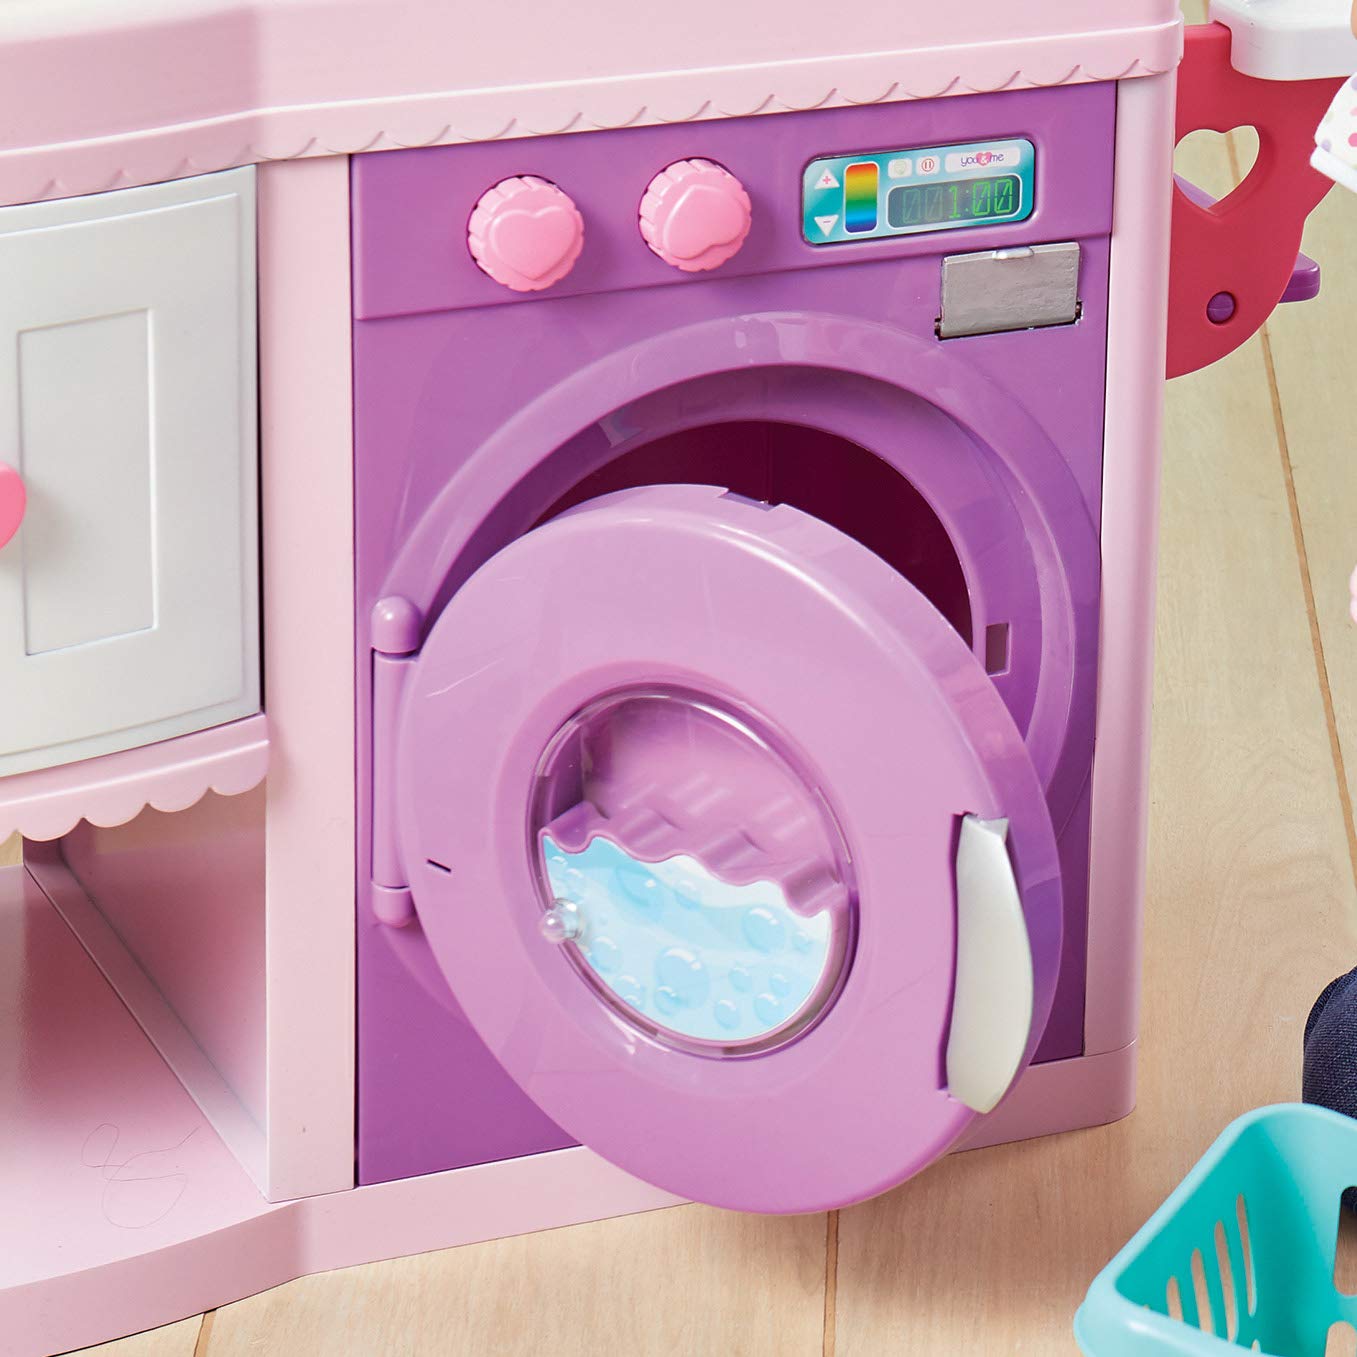 You & Me Complete Care Center Baby Doll Kitchen and Crib Playset with Appliances and Accessories, for Ages 3-6